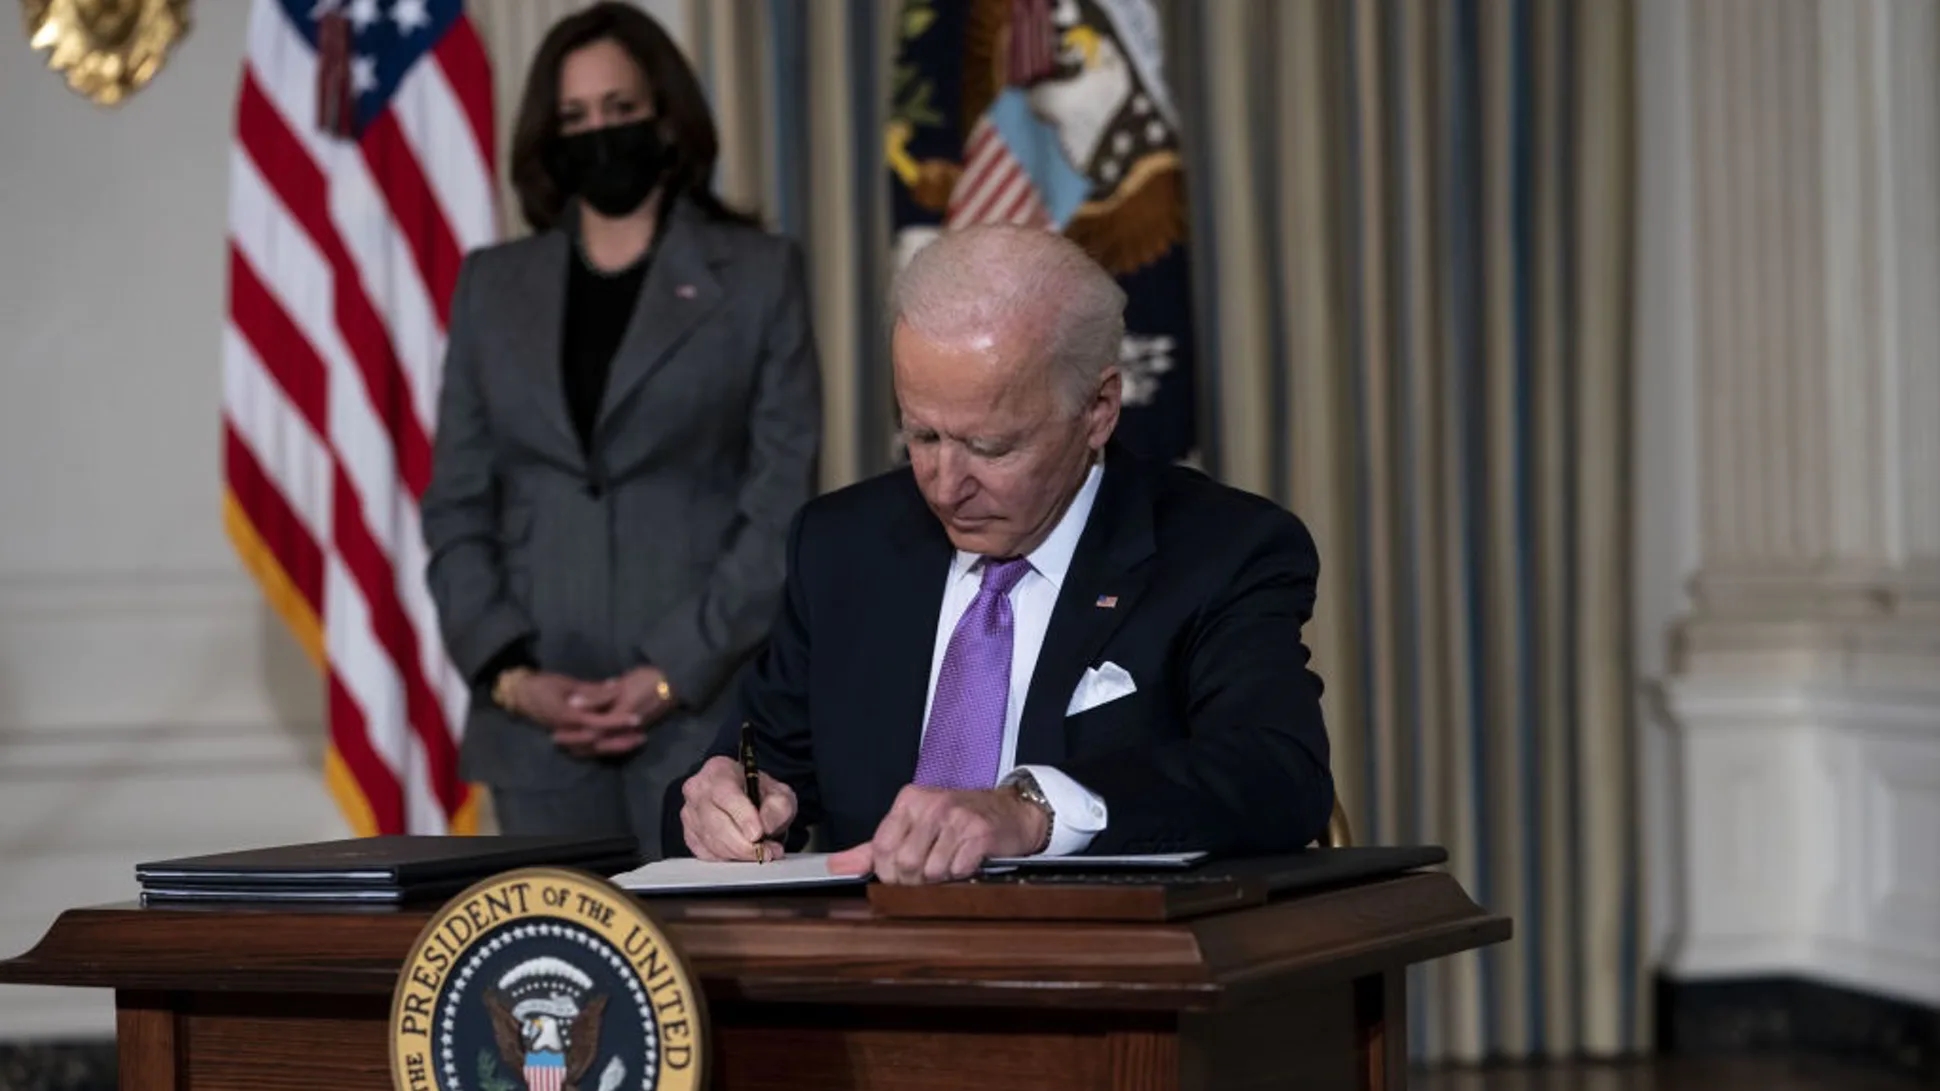 Biden Cancels Private Prisons Because Of…Wait For It…”Race”